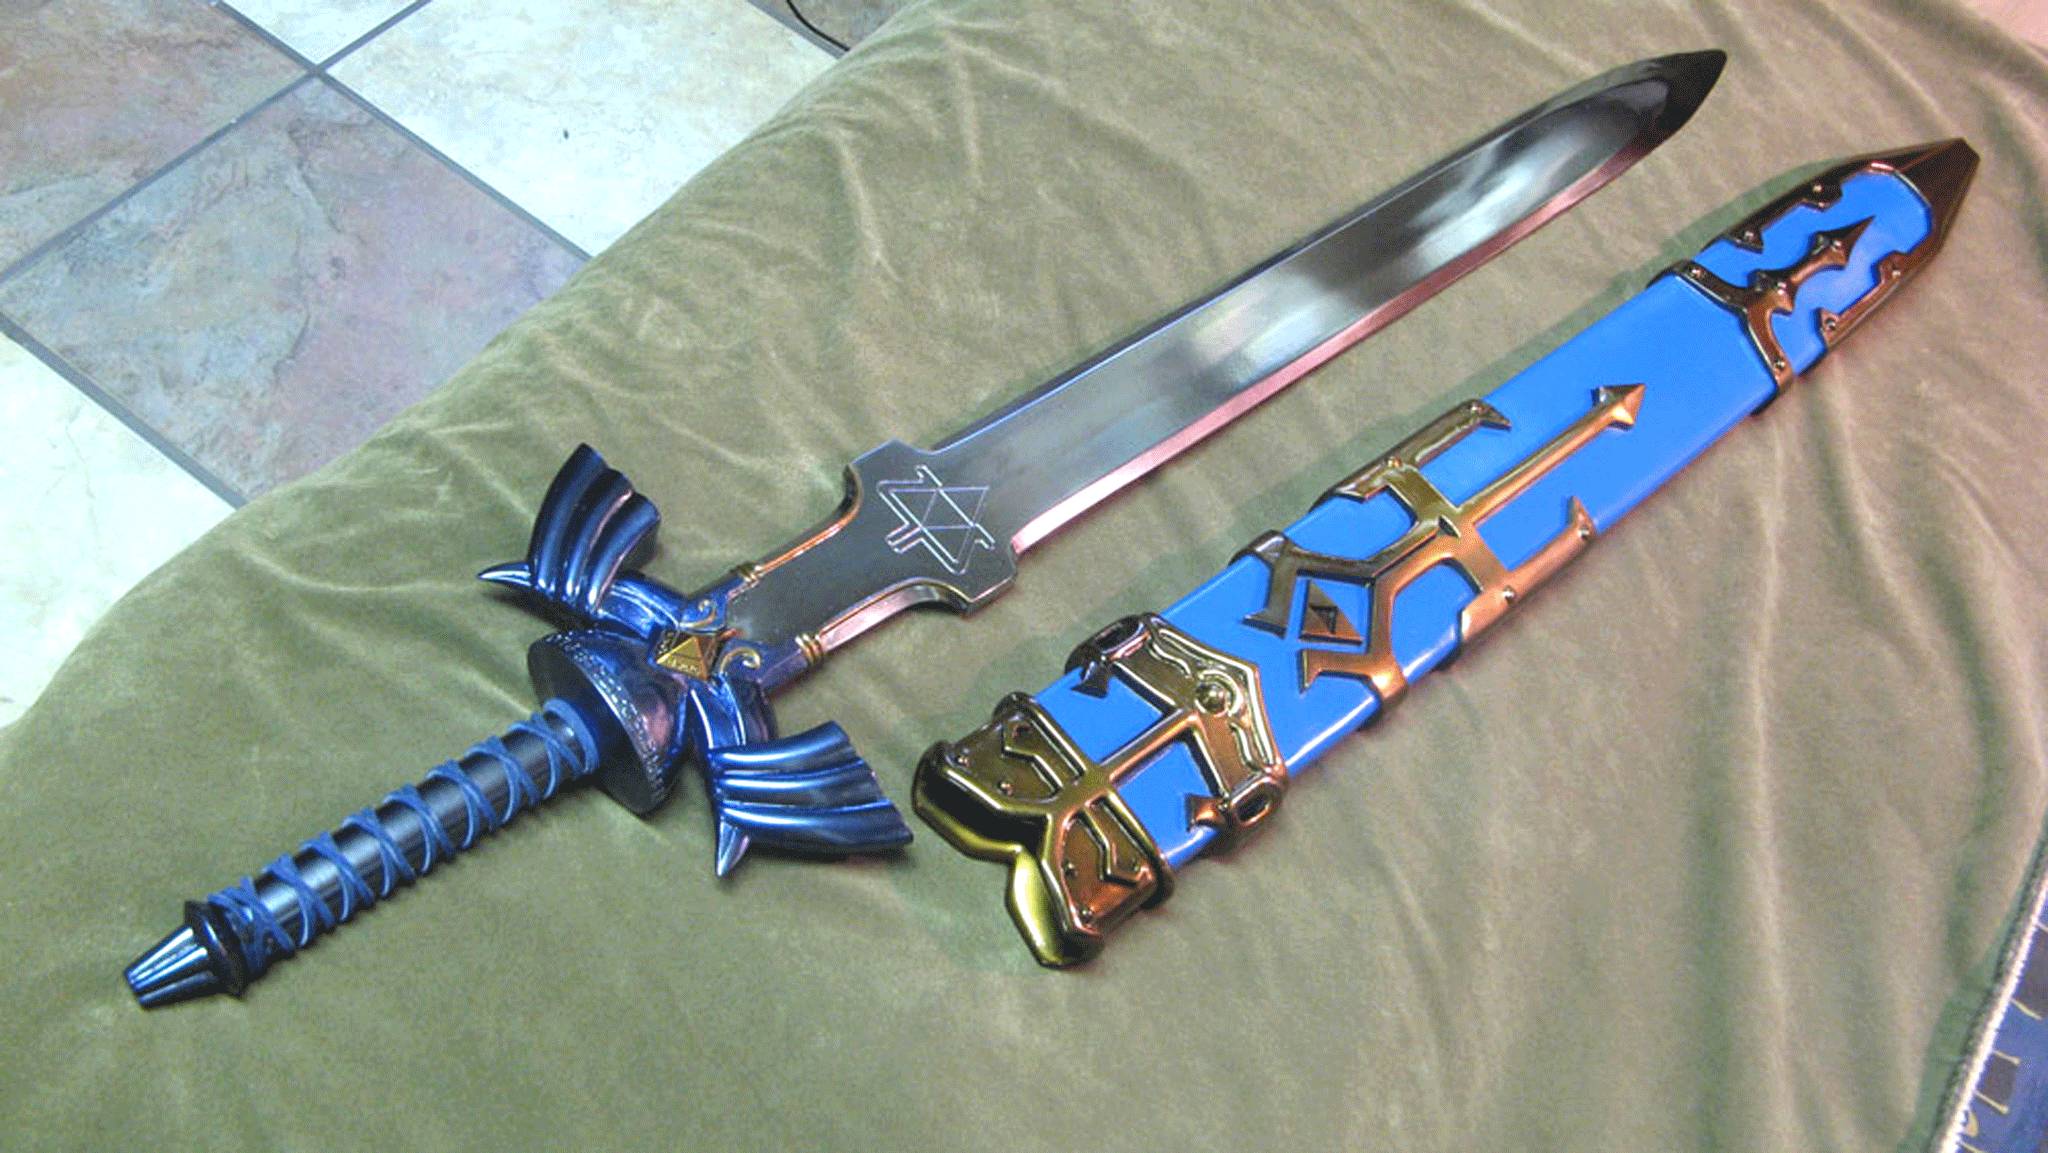 images of the master sword